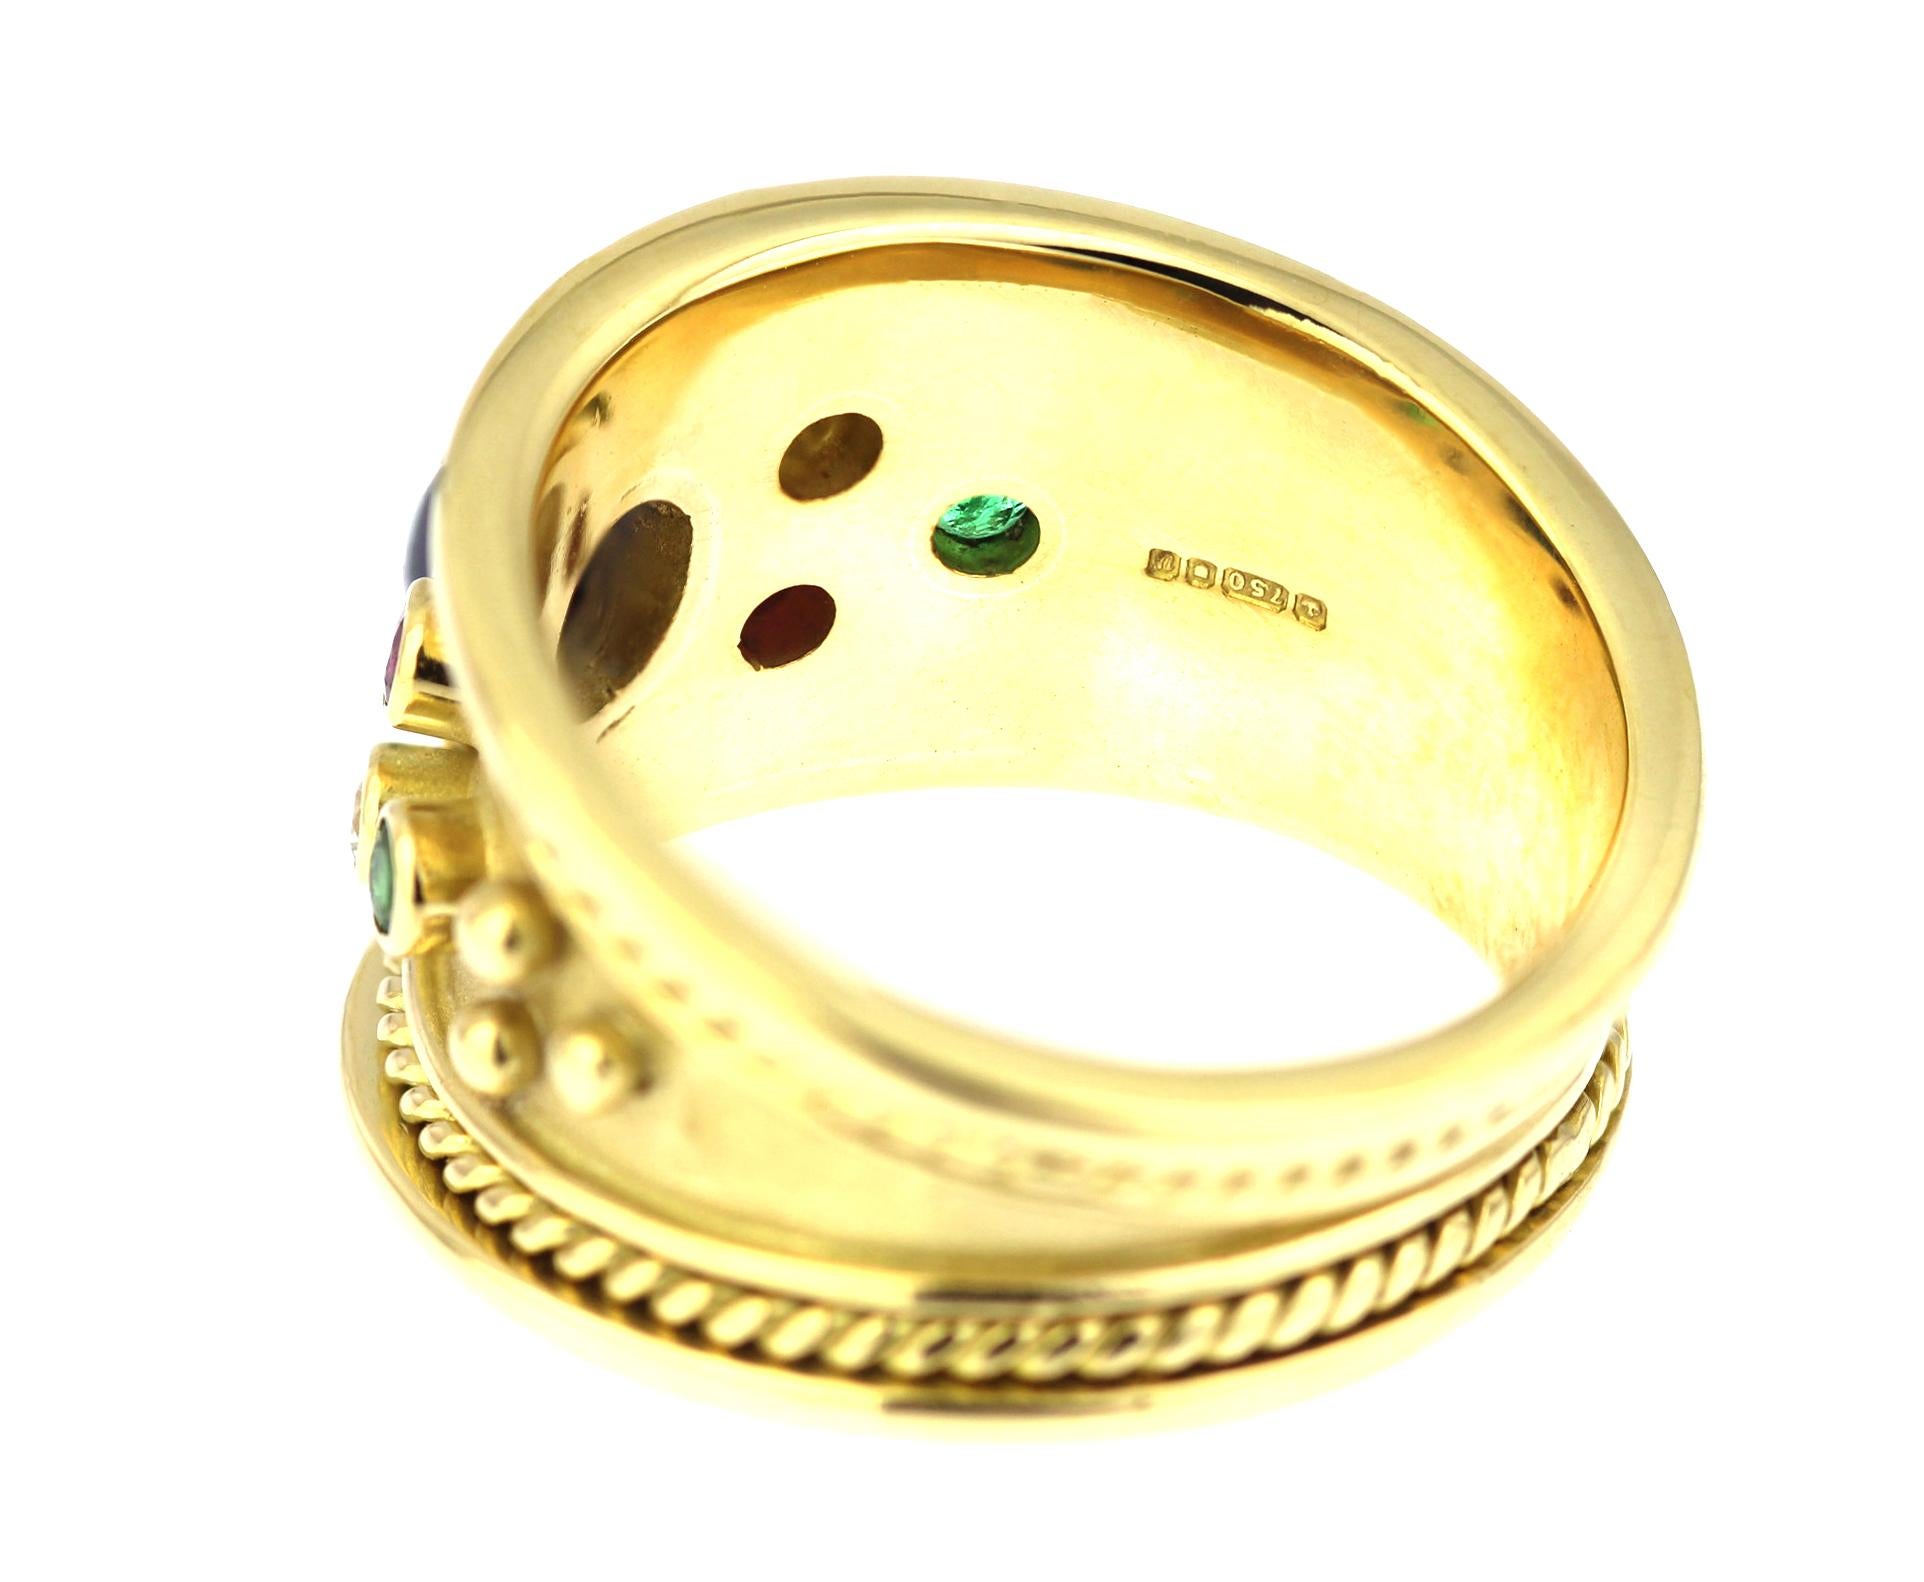 Sapphire, Ruby, Diamond and Emerald Tapered Templar Ring in 18 Carat Yellow Gold For Sale 1